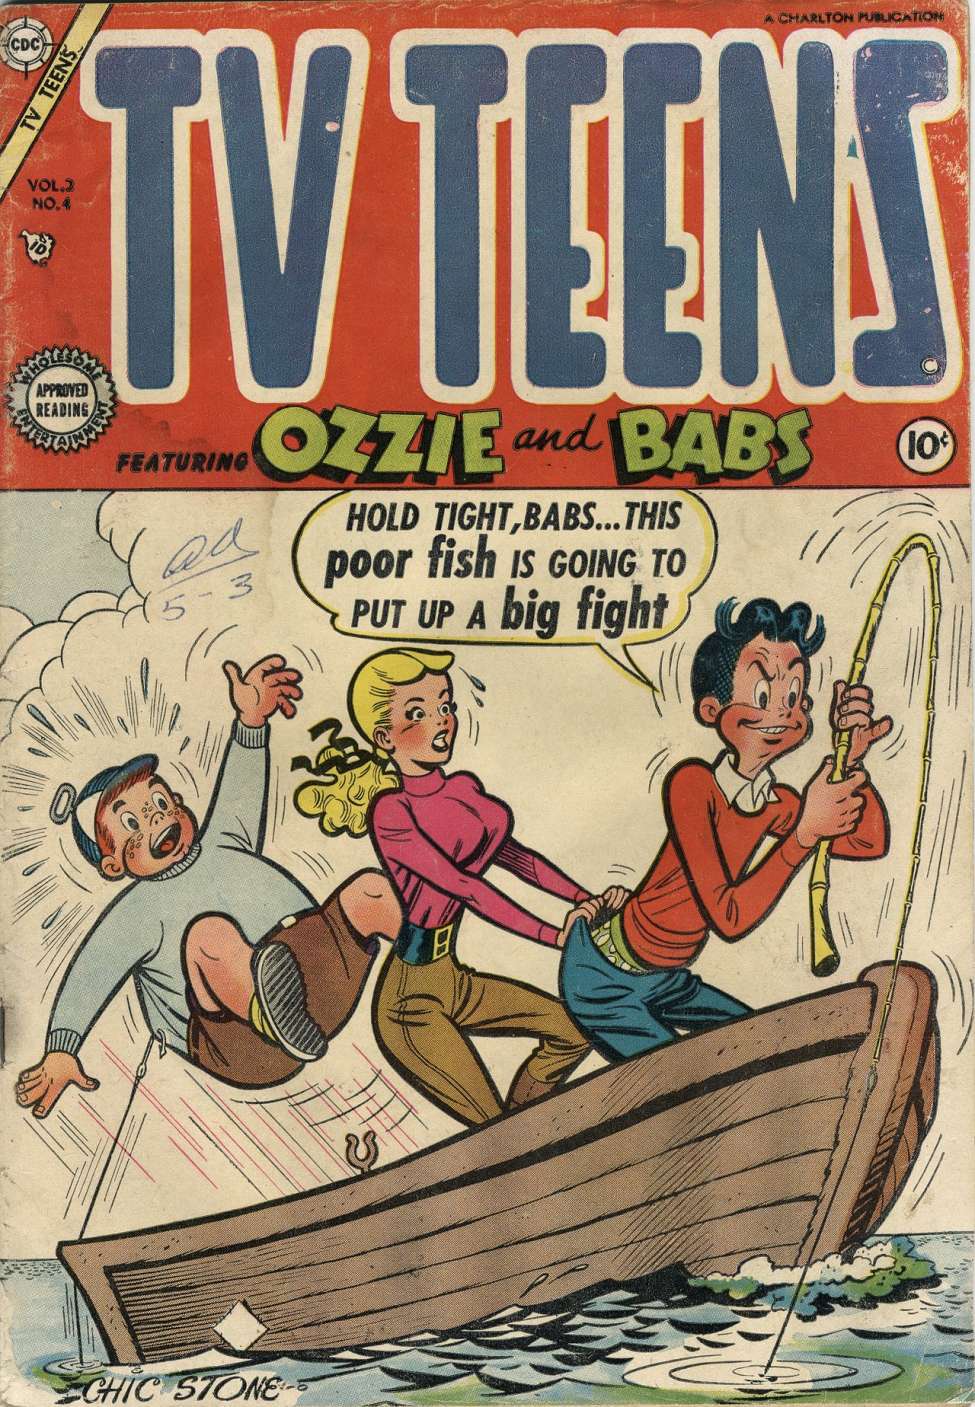 Book Cover For TV Teens 4